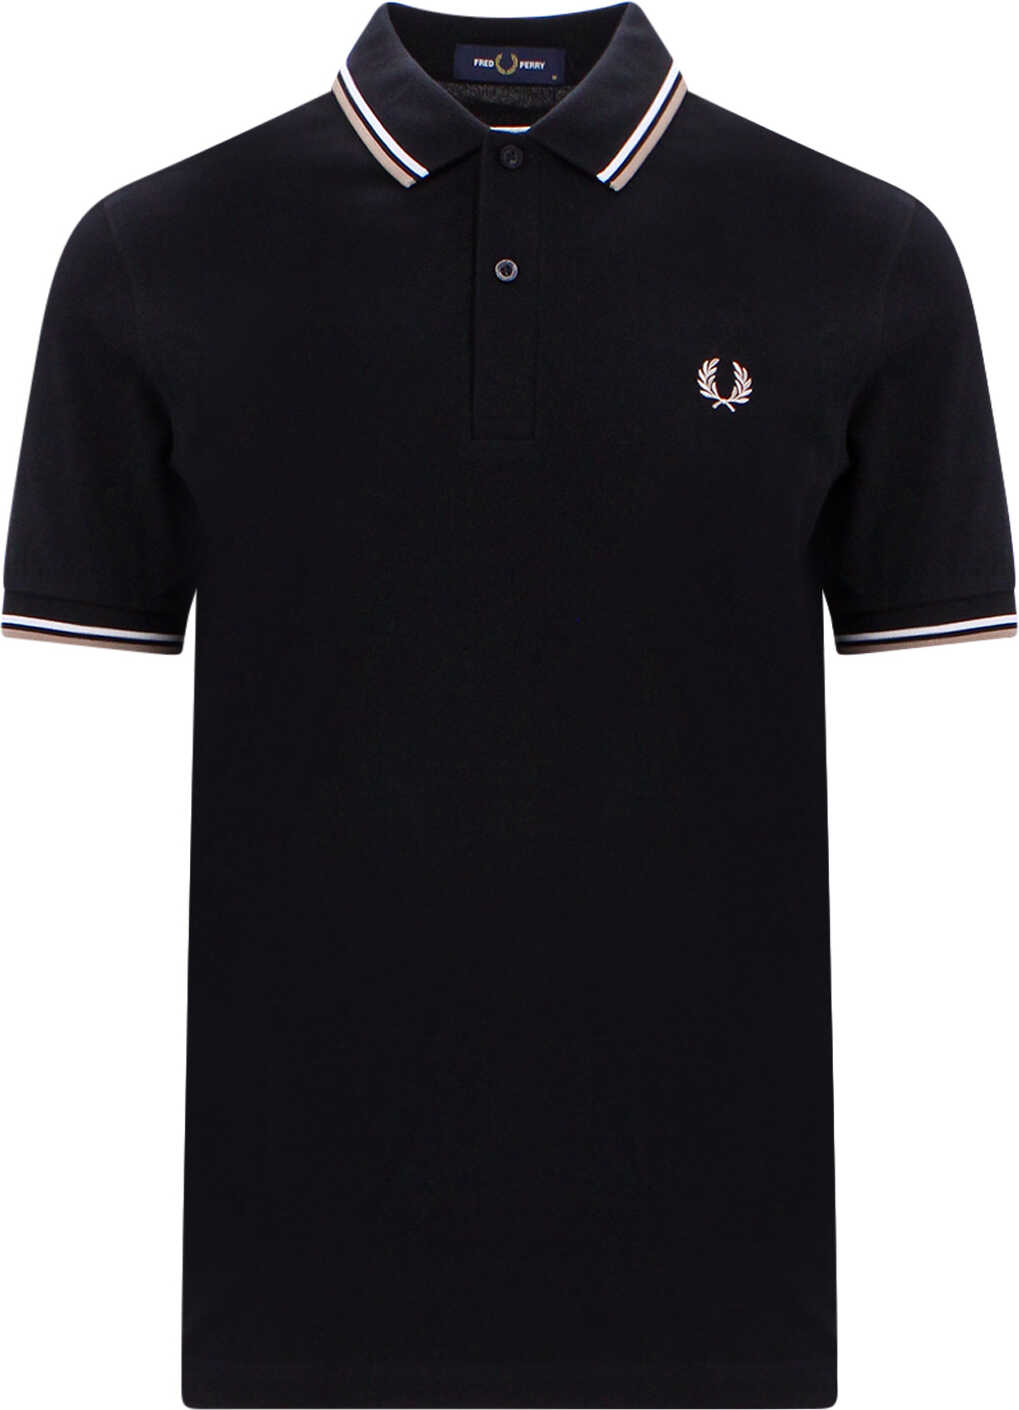 Fred Perry Polo Shirt Black